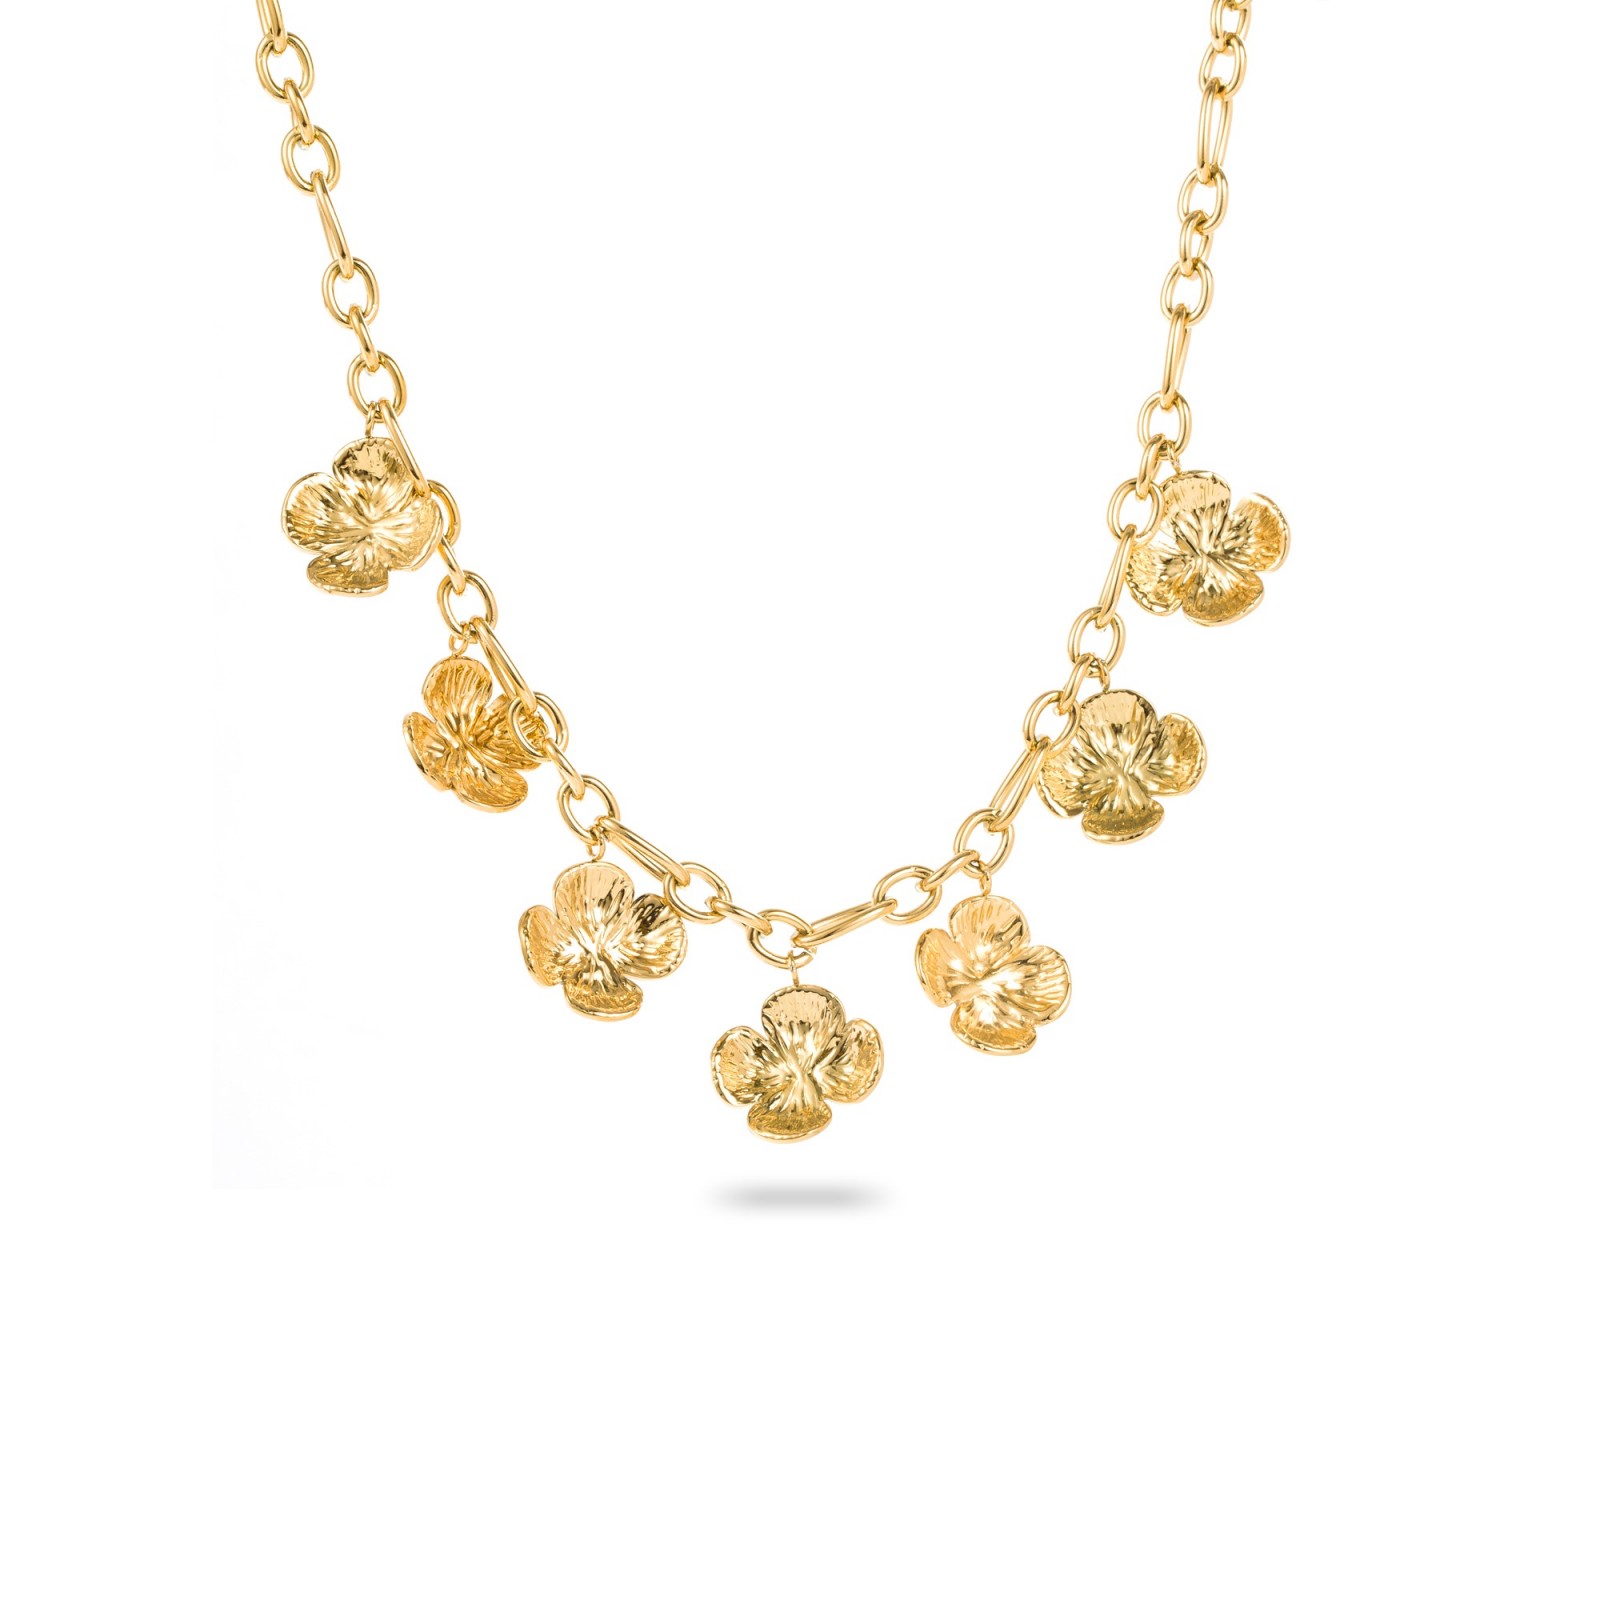 Stainless Steel Short Necklace Color:Gold